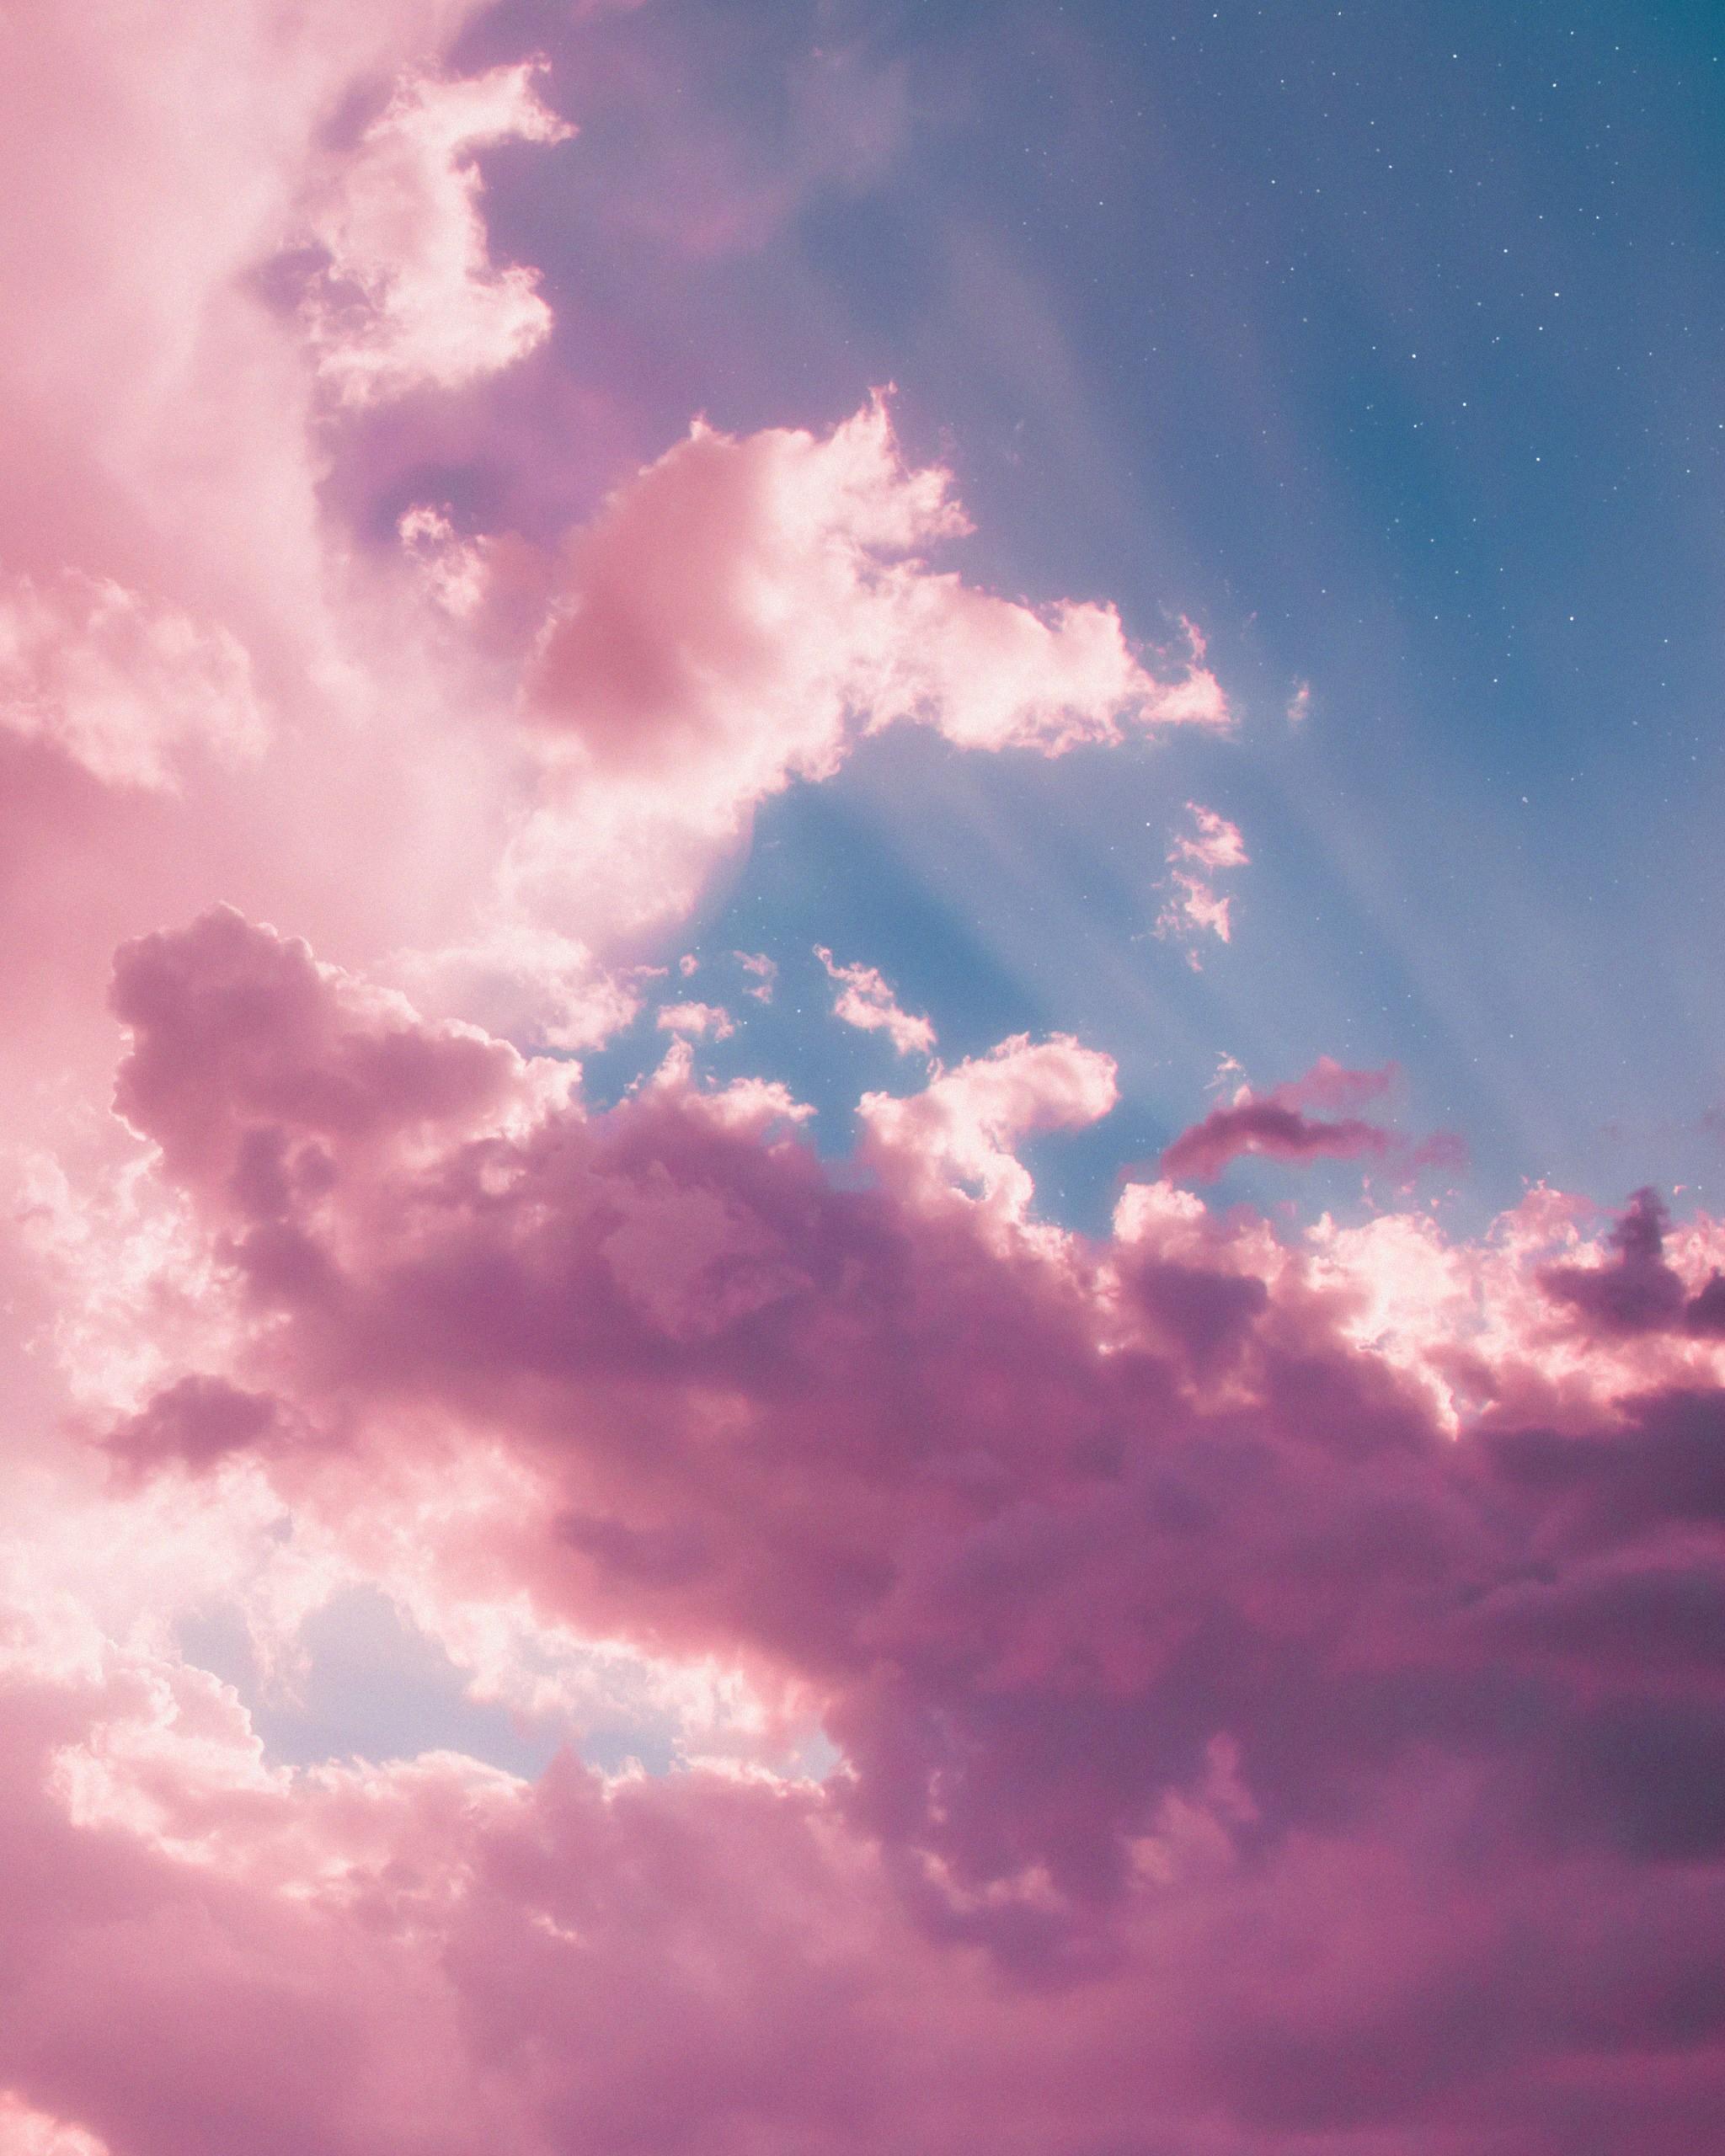 HD wallpaper, Shade, Blue, White, Nature, Sunlight, Pink Clouds, Sky, Photography, Clouds, Pink